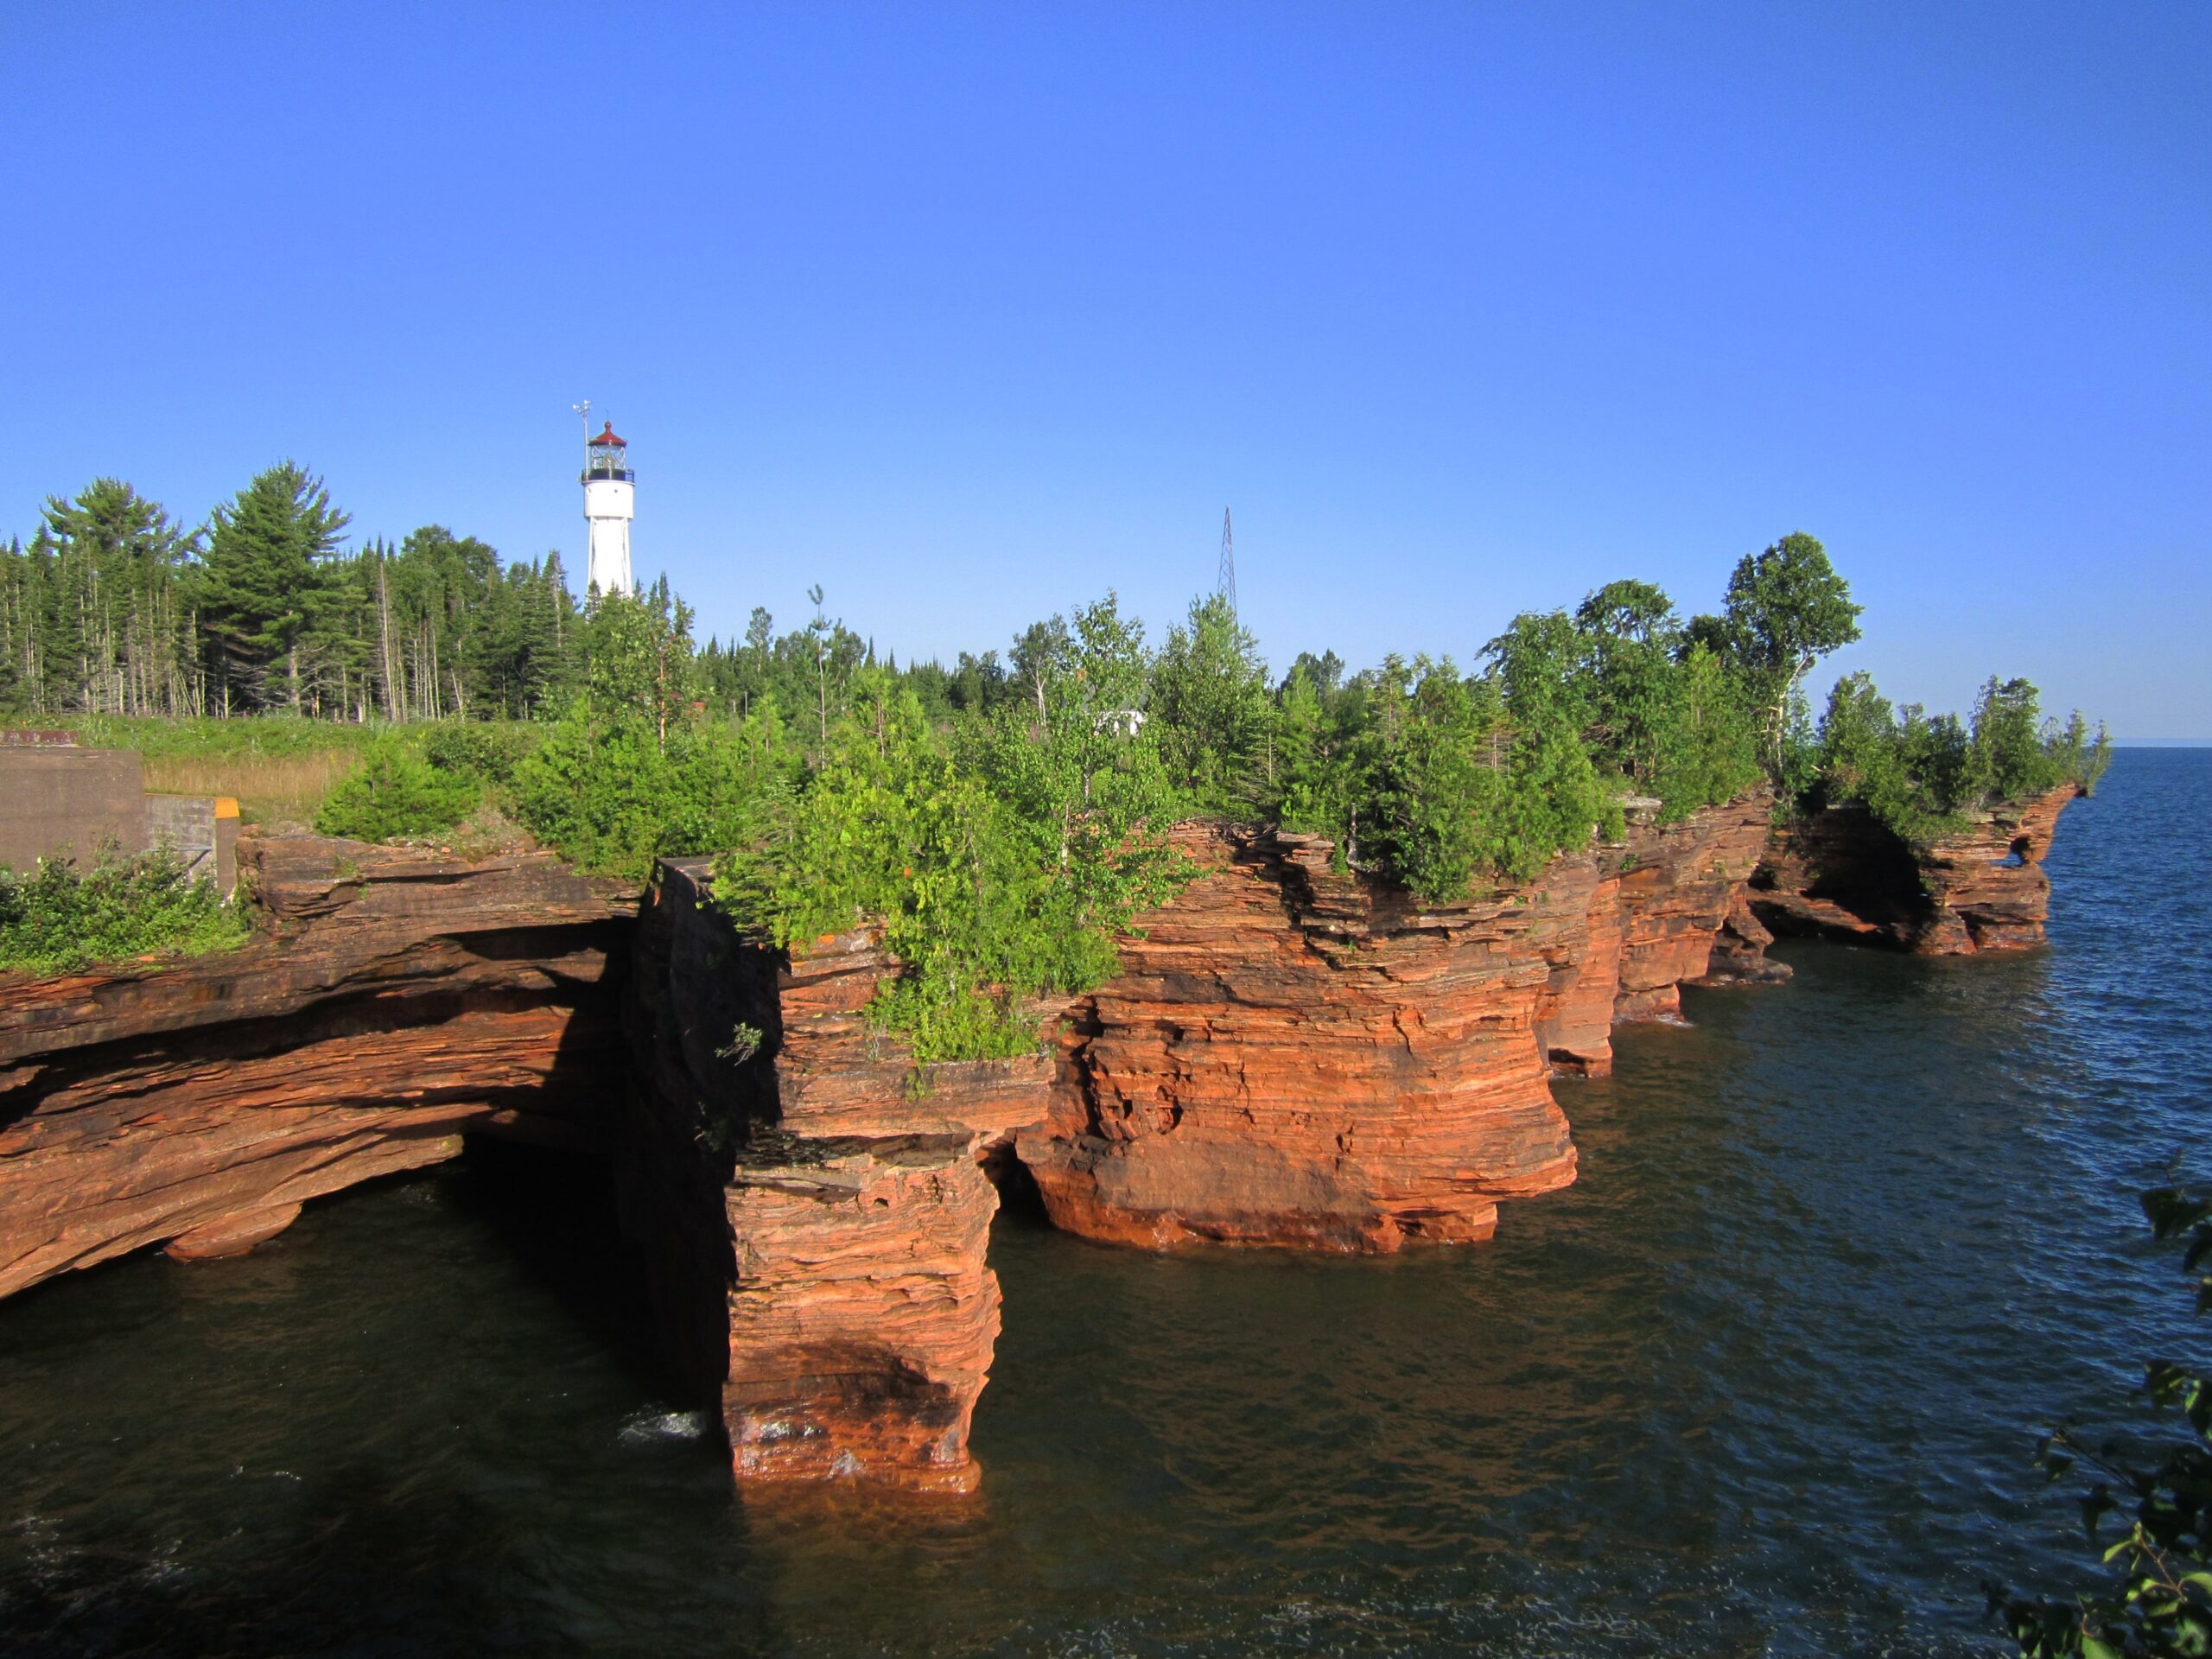 Maintenance costs have soared at national parks. That includes the Apostle Islands National Lakeshore.